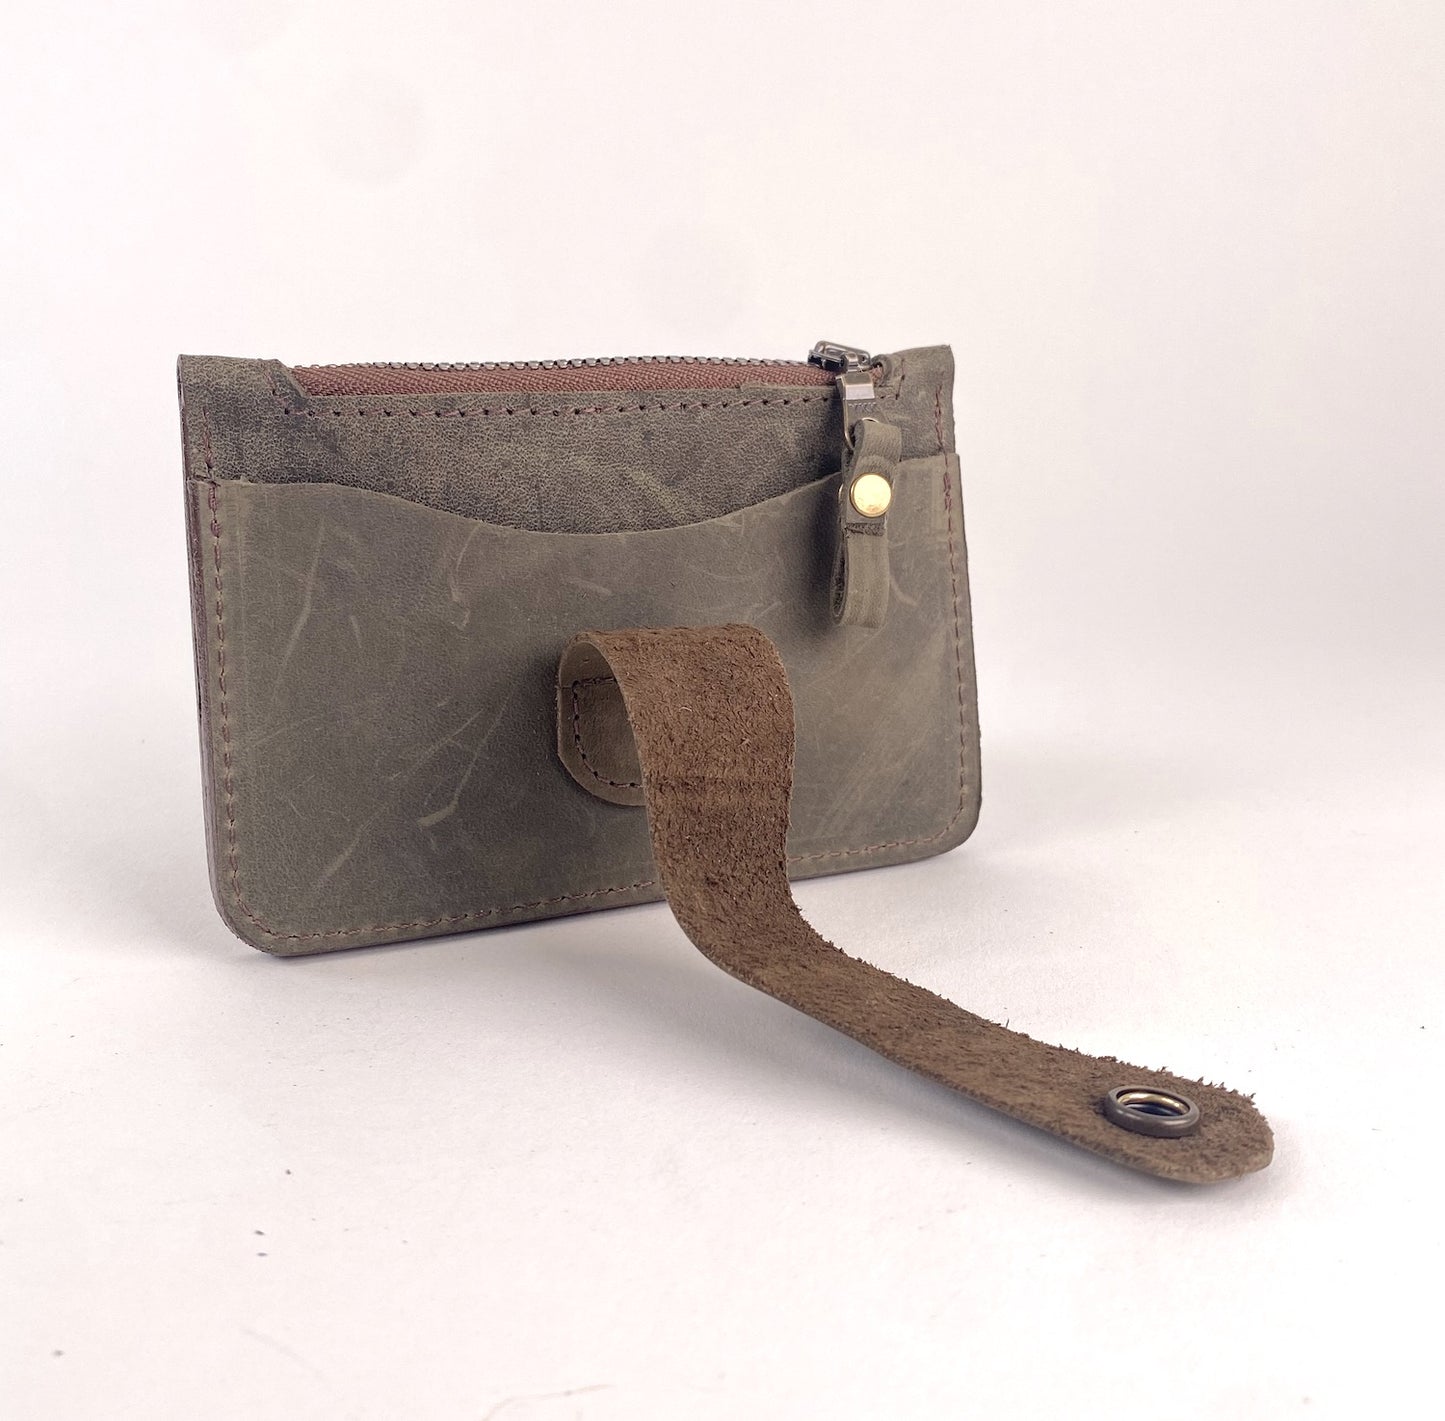 CardGuard Minimalist Leather Wallet in Olive Green